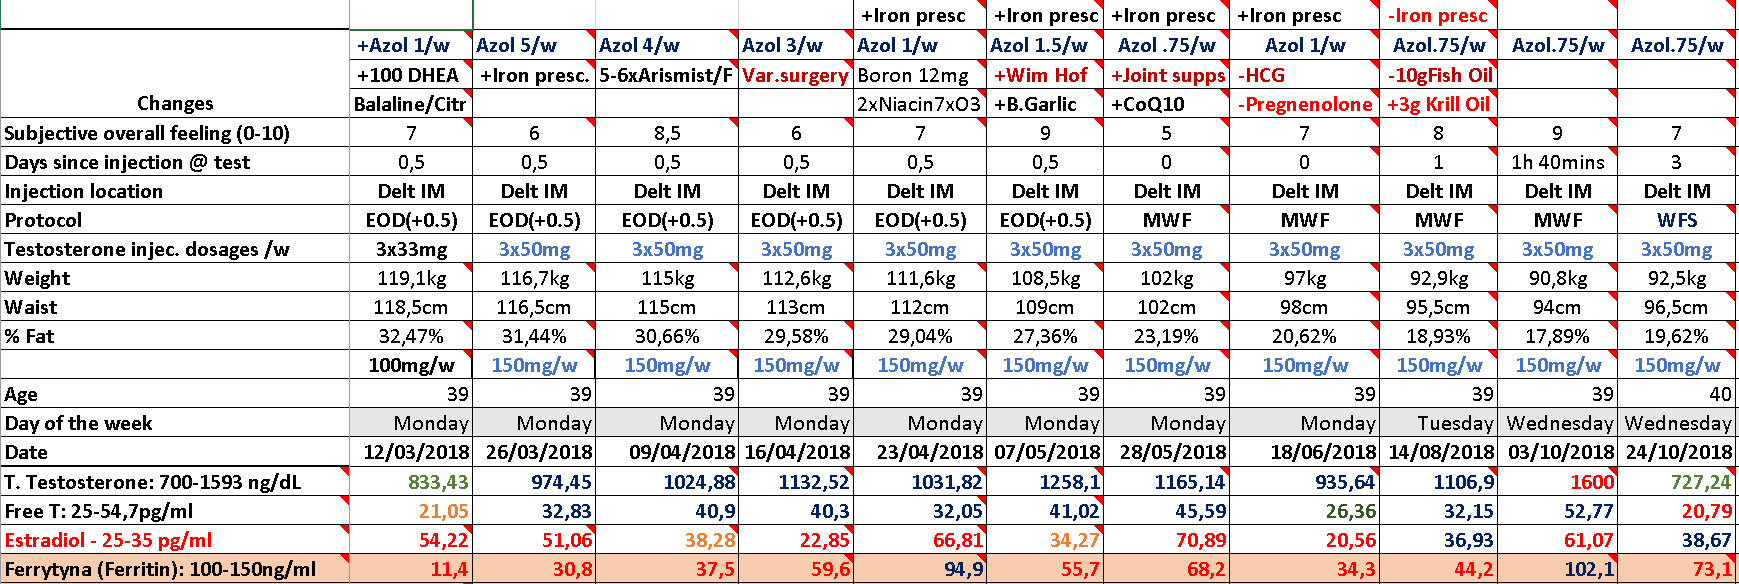 More_Thyroid_data_comparison_overtime_ferritin_changes.png